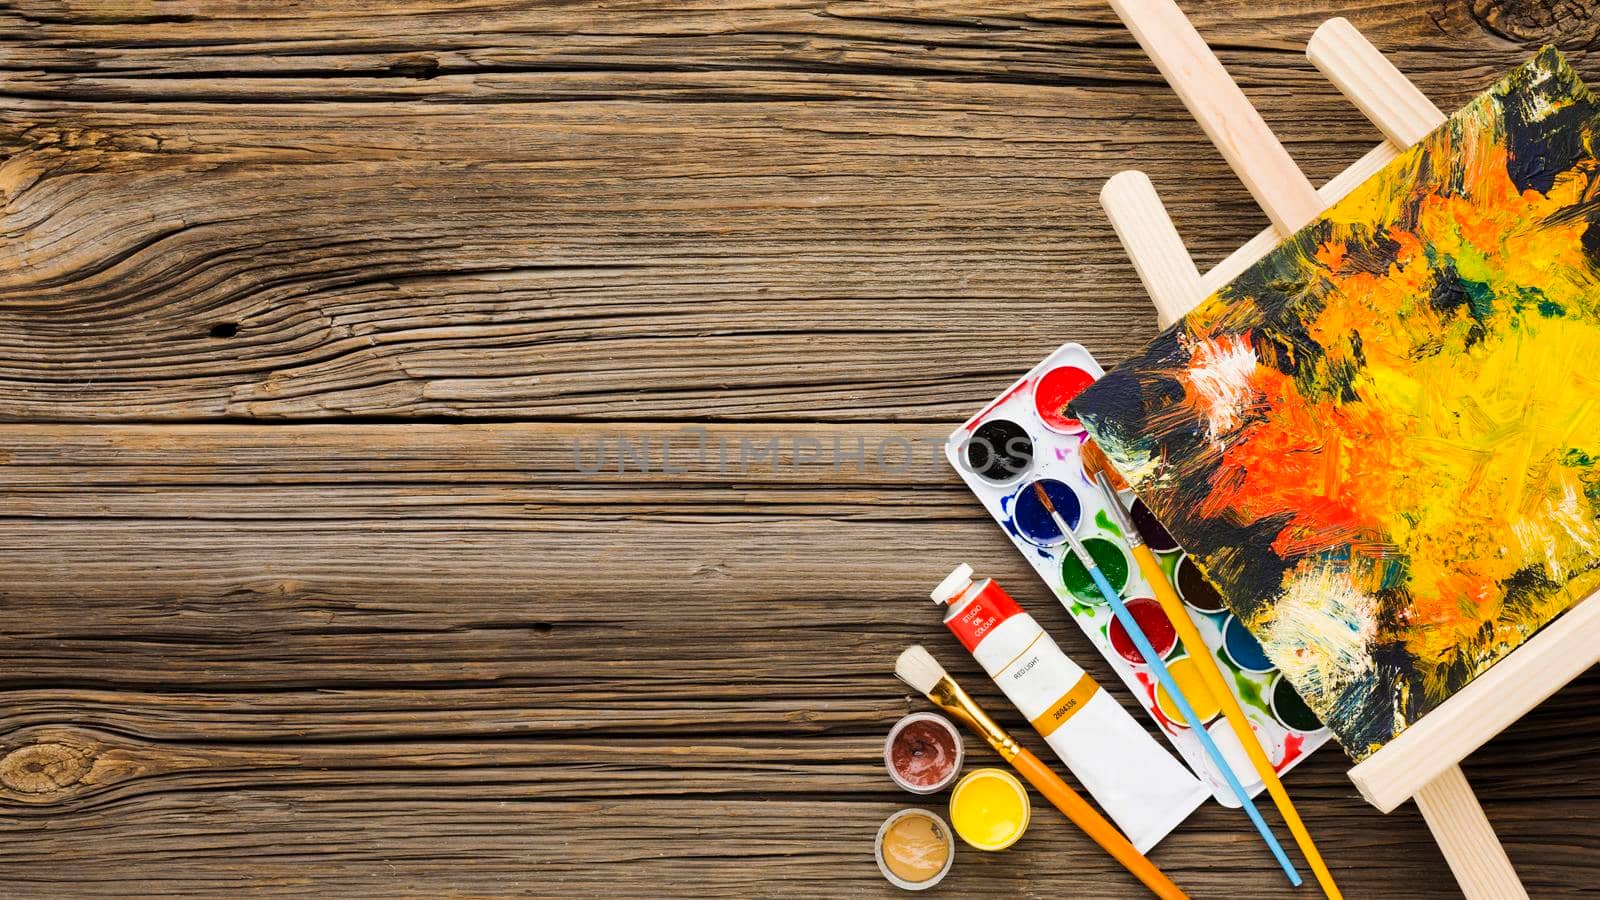 copy space wooden background paint by Zahard